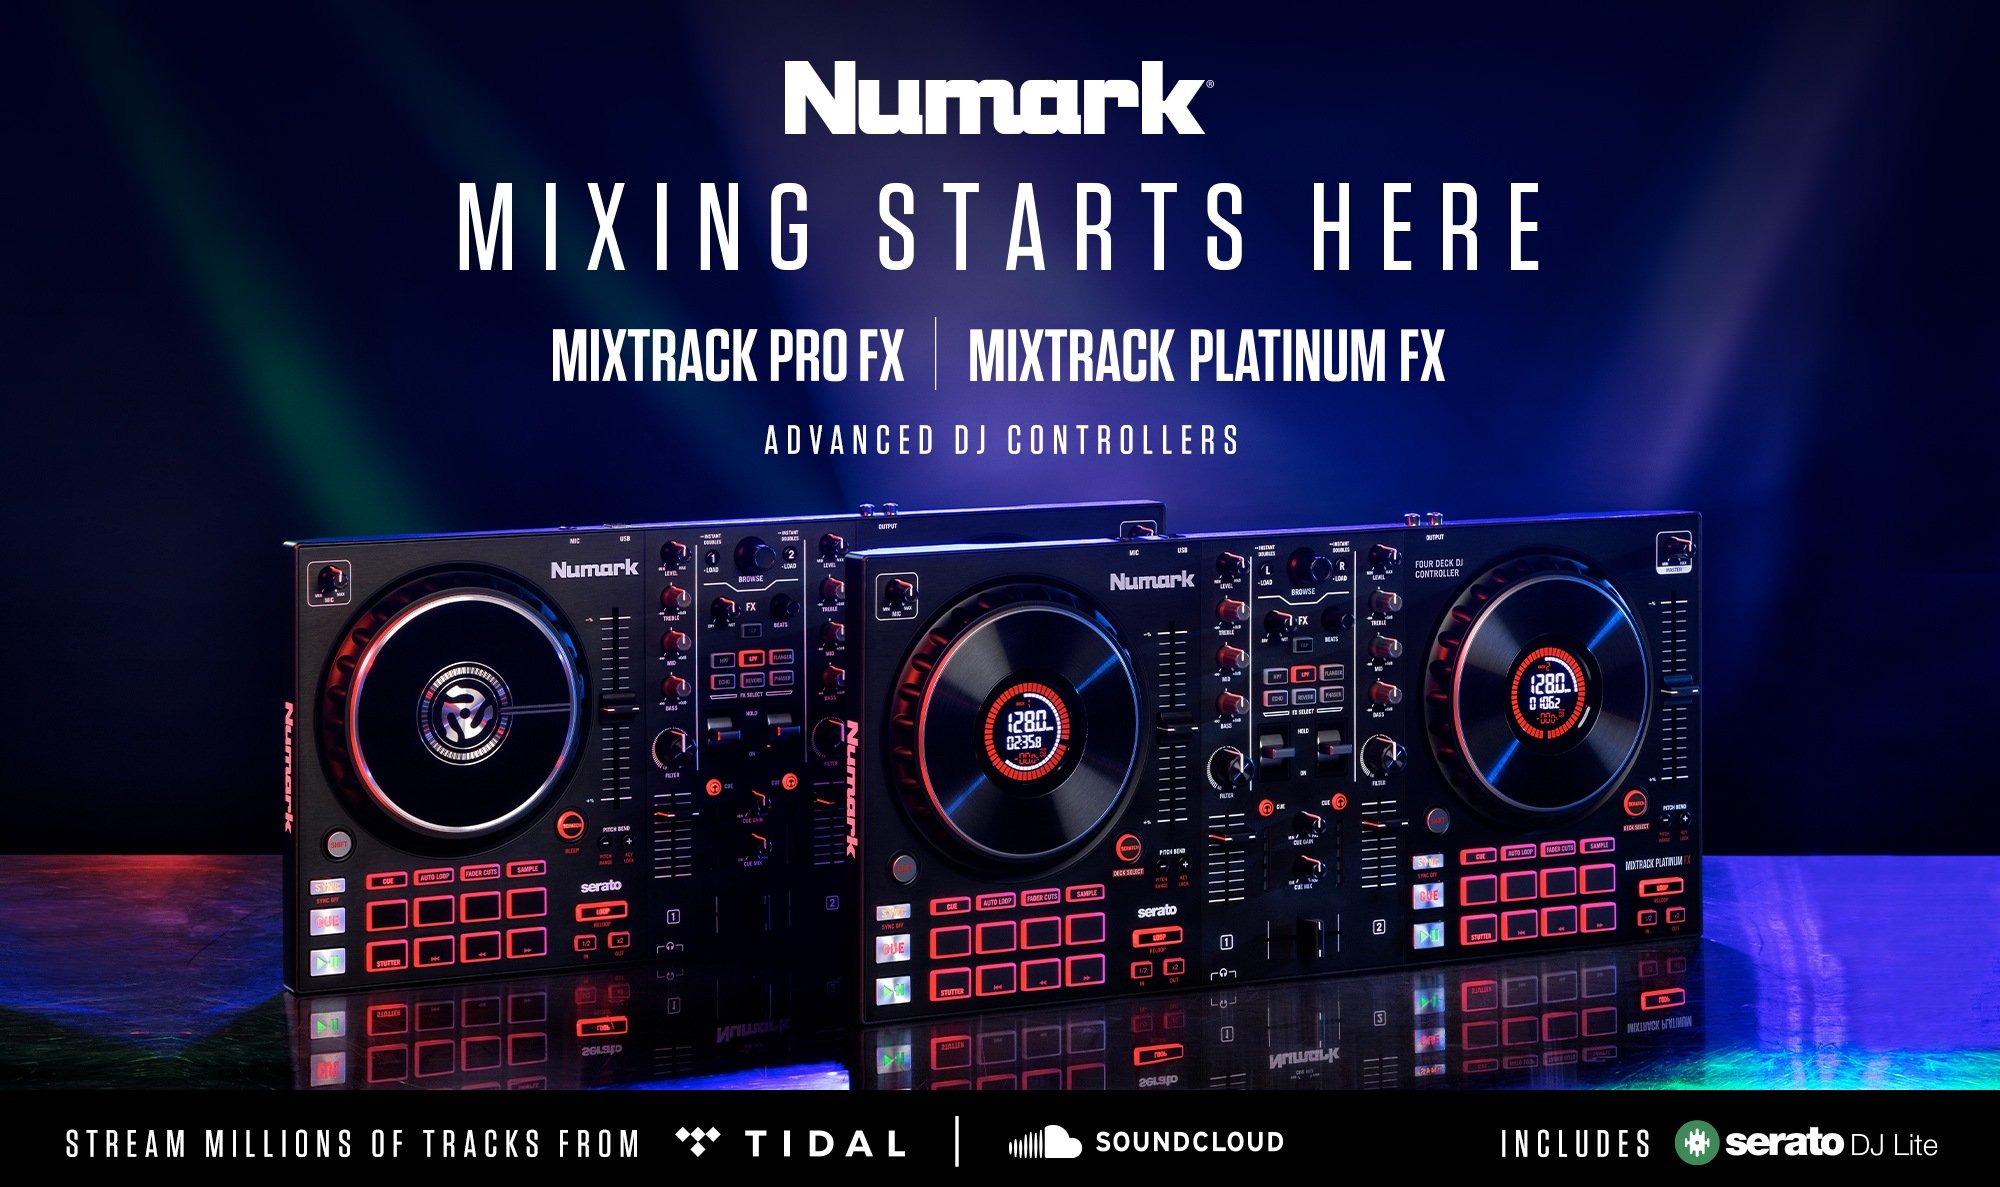 New Numark Mixtrack Pro Fx And Mixtrack Platinum Fx Whats The Difference